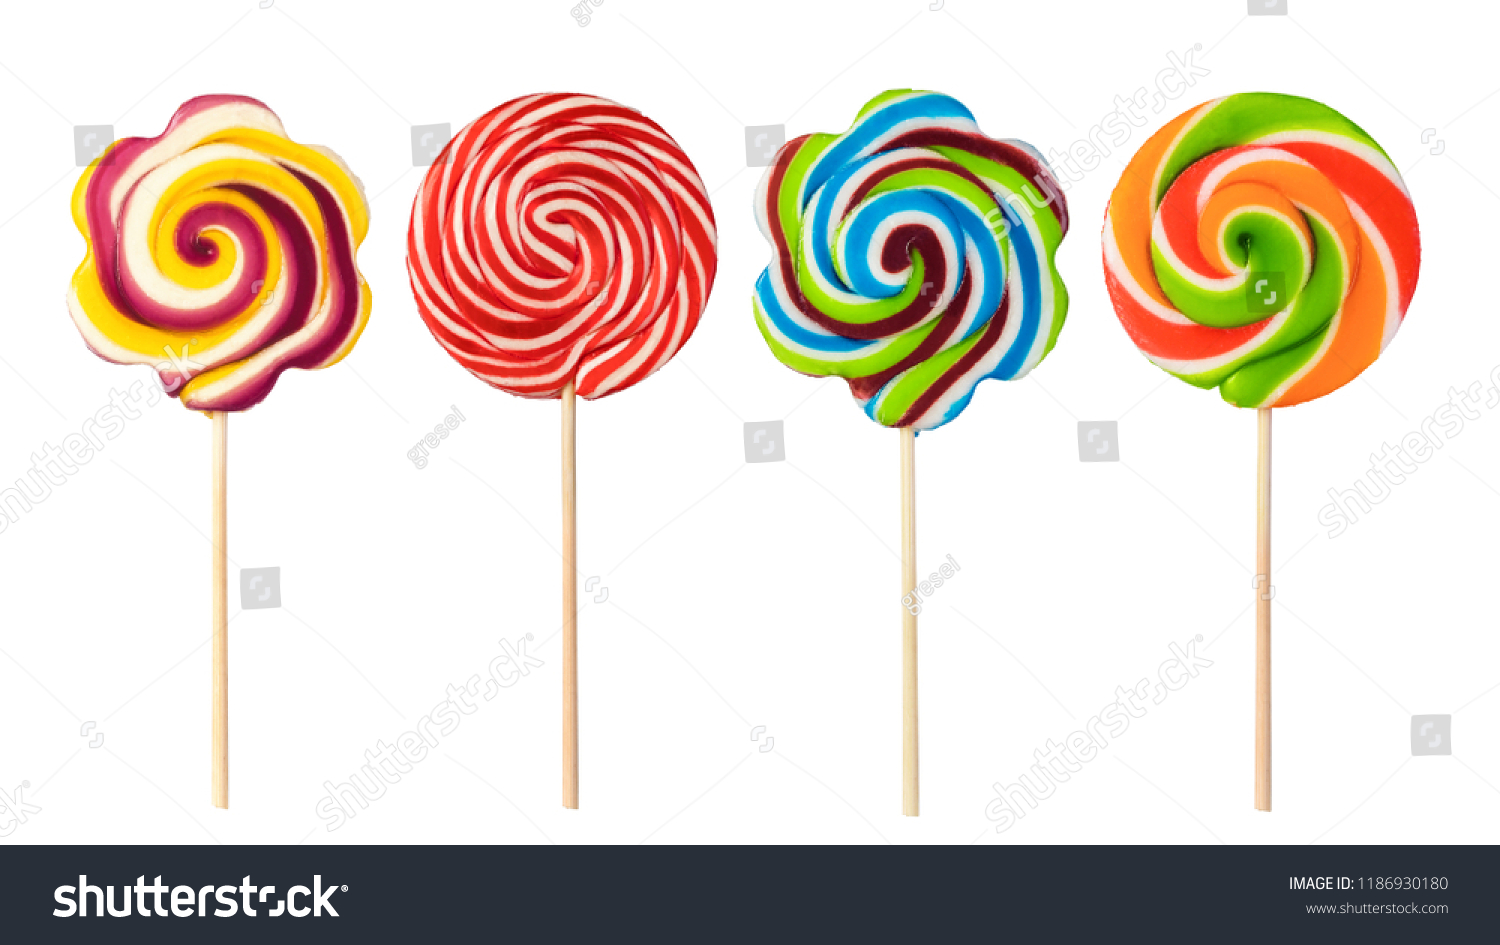 powerpoint-template-candy-colorful-lollipops-isolated-on-iipnukhiph